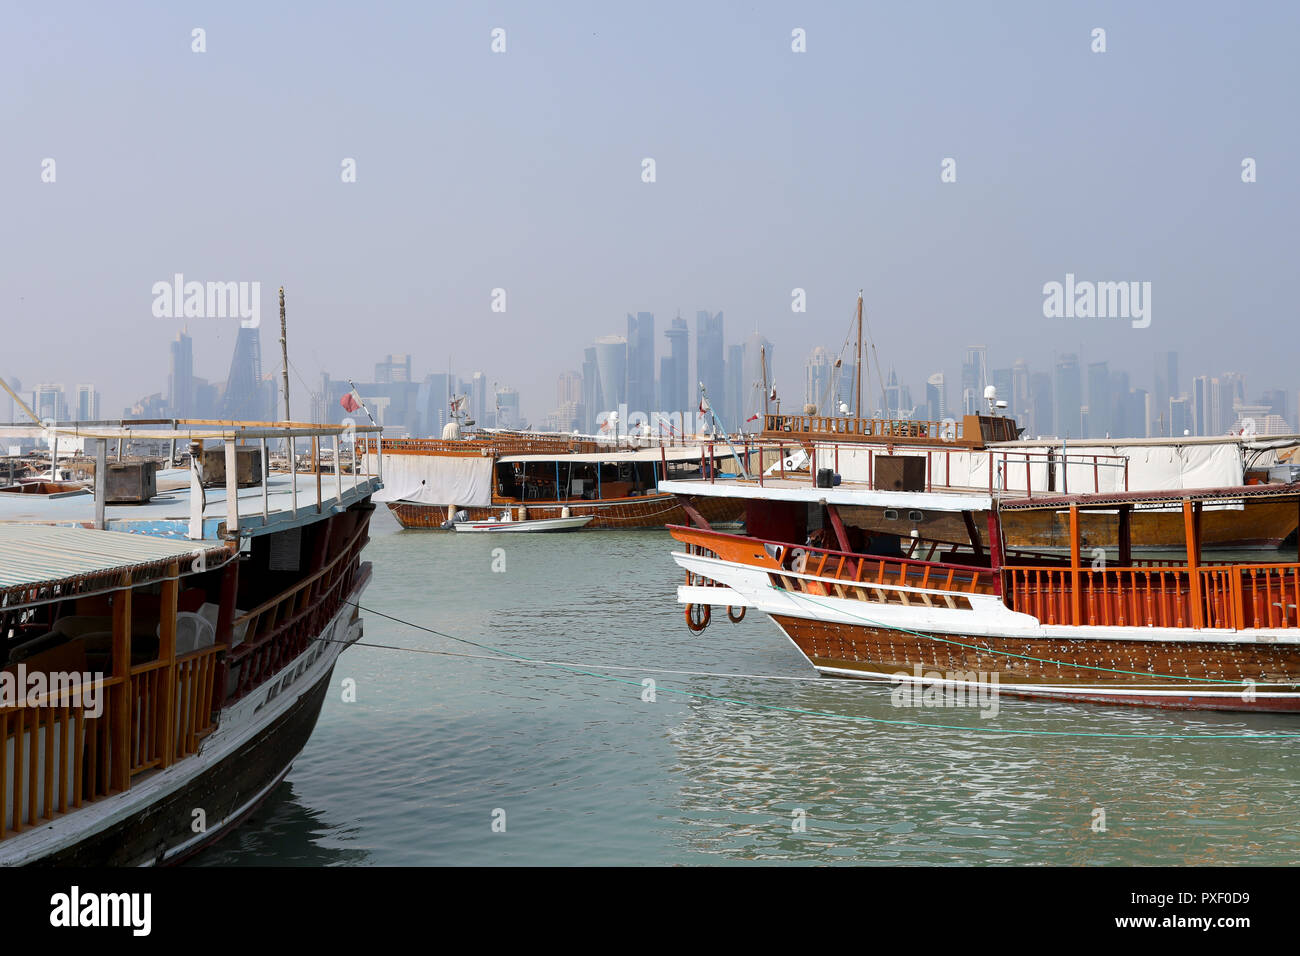 Doha / Qatar – October 10, 2018: Traditional dhows moored up along the corniche in the Qatari capital Doha, with the skyscrapers of the West Bay area  Stock Photo